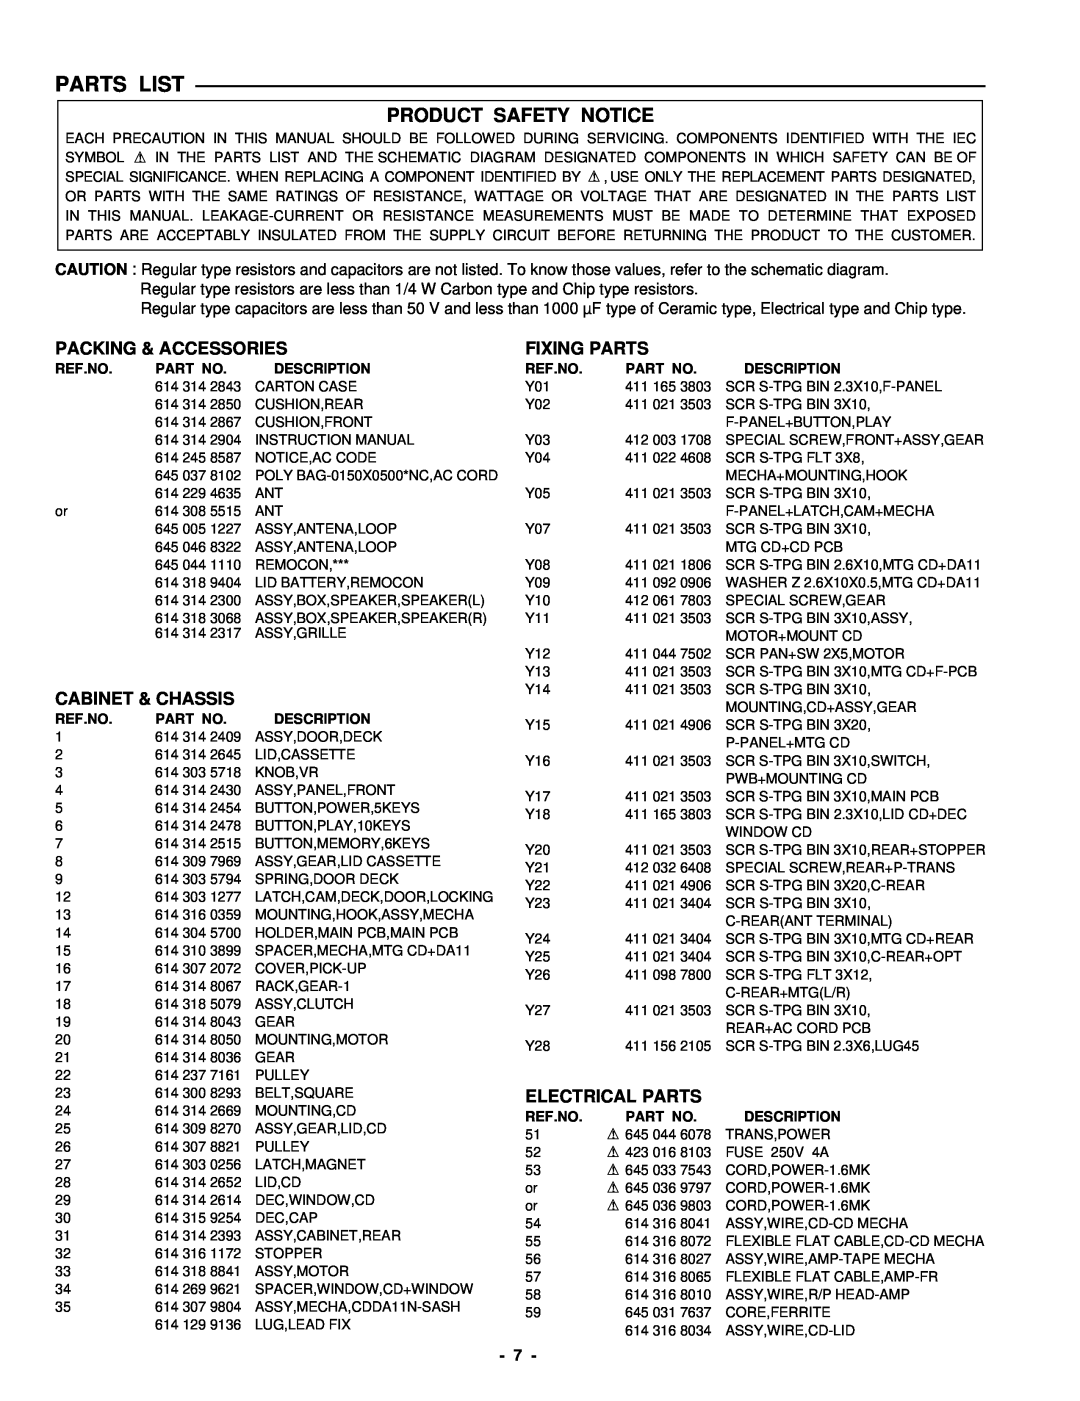 Sanyo DC-DA370 Parts List, Packing & Accessories, Cabinet & Chassis, Fixing Parts, Electrical Parts, Product Safety Notice 